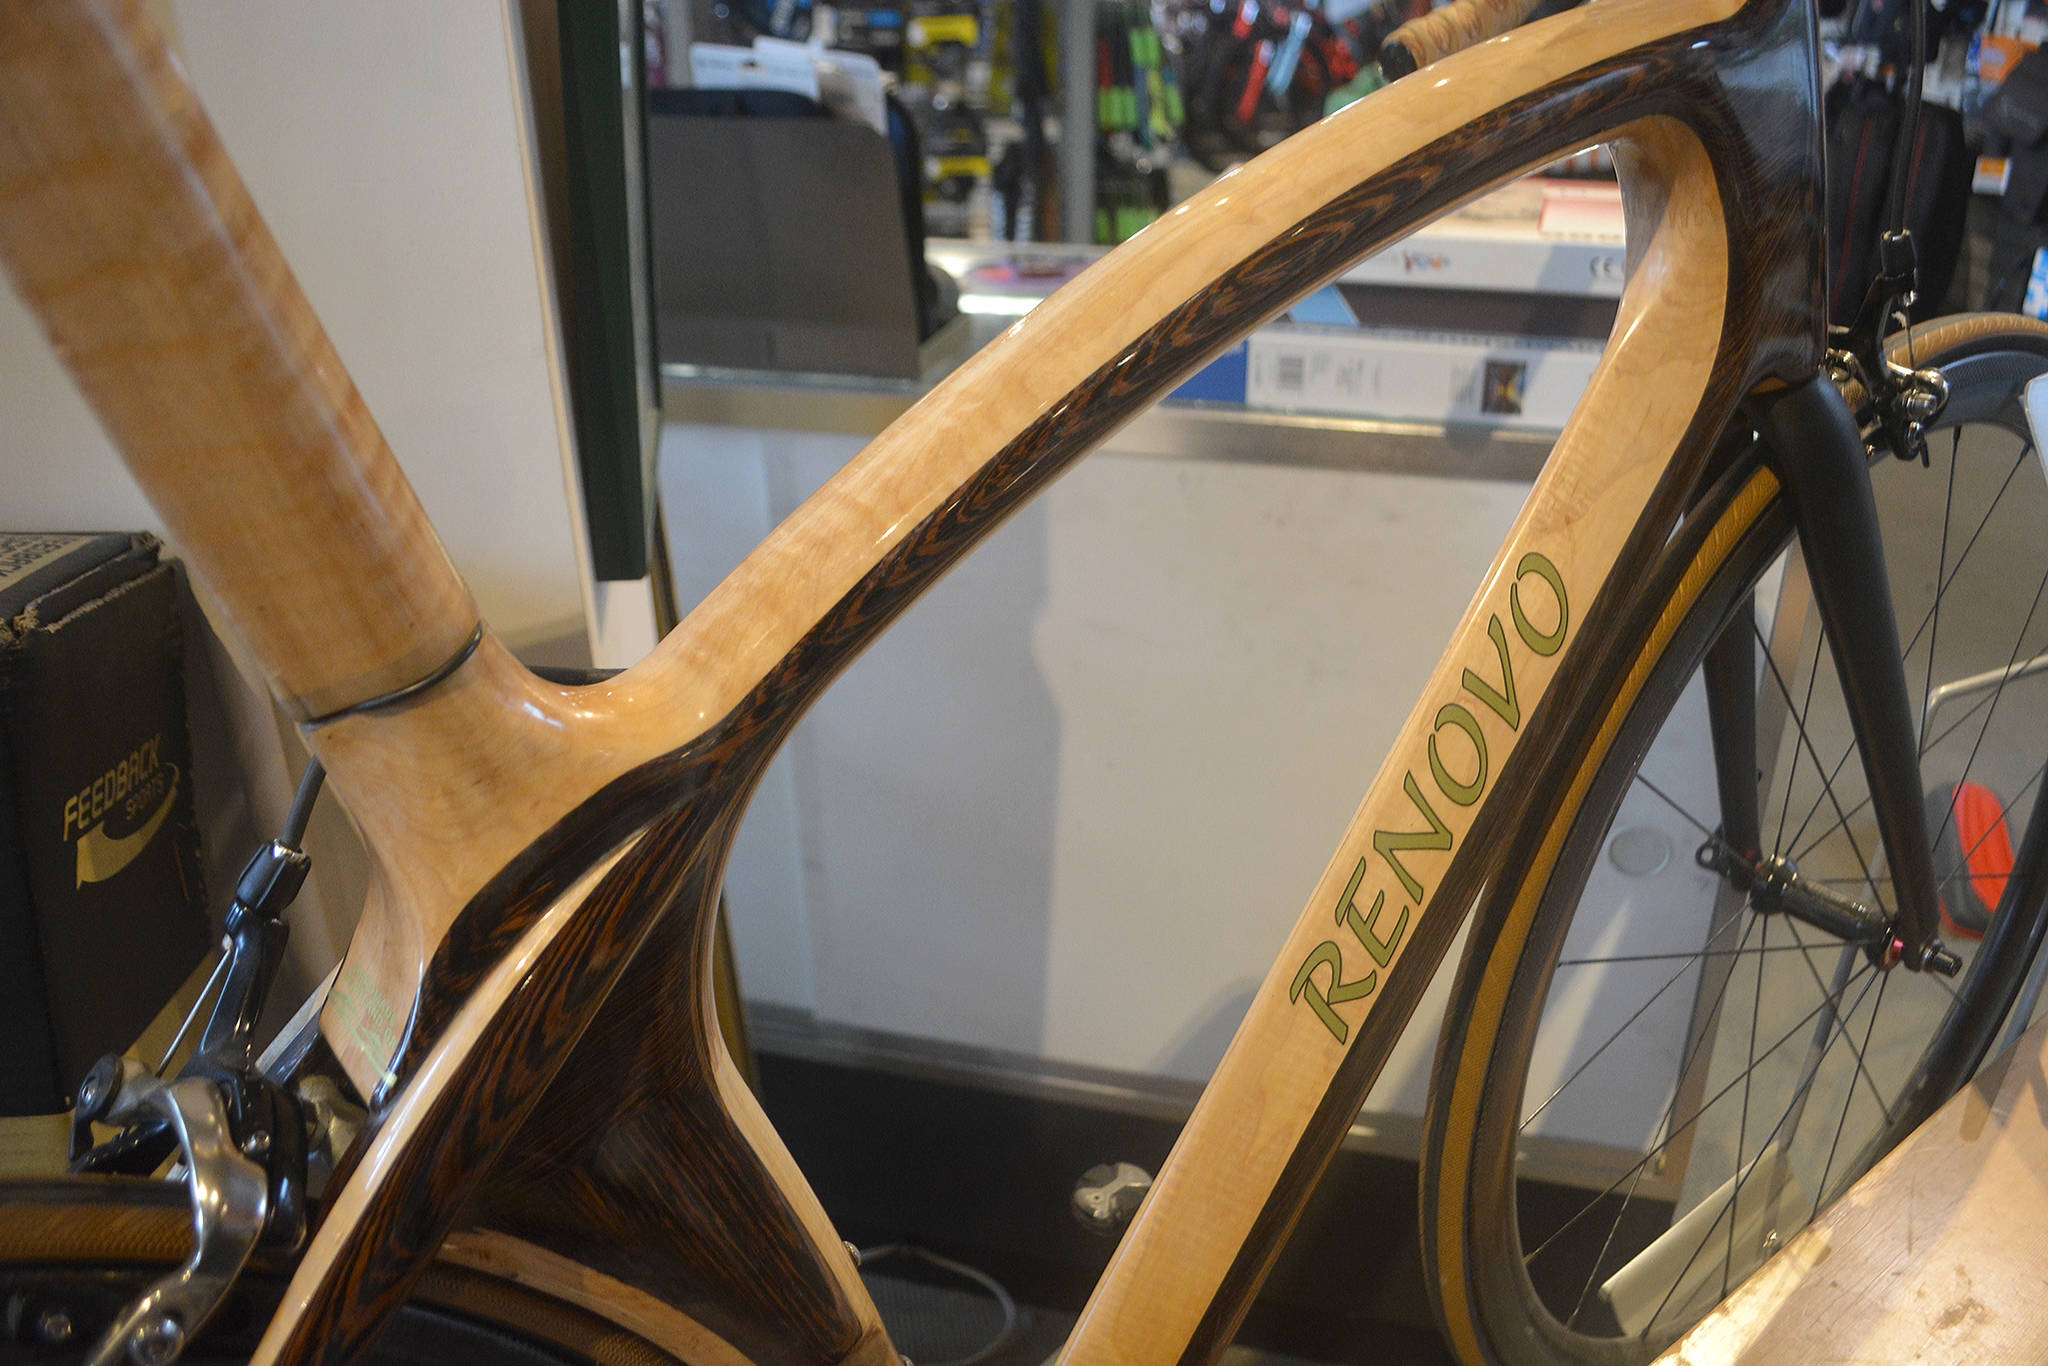 This Renovo Aerowood bicycle is made of wood in Portland, Ore.